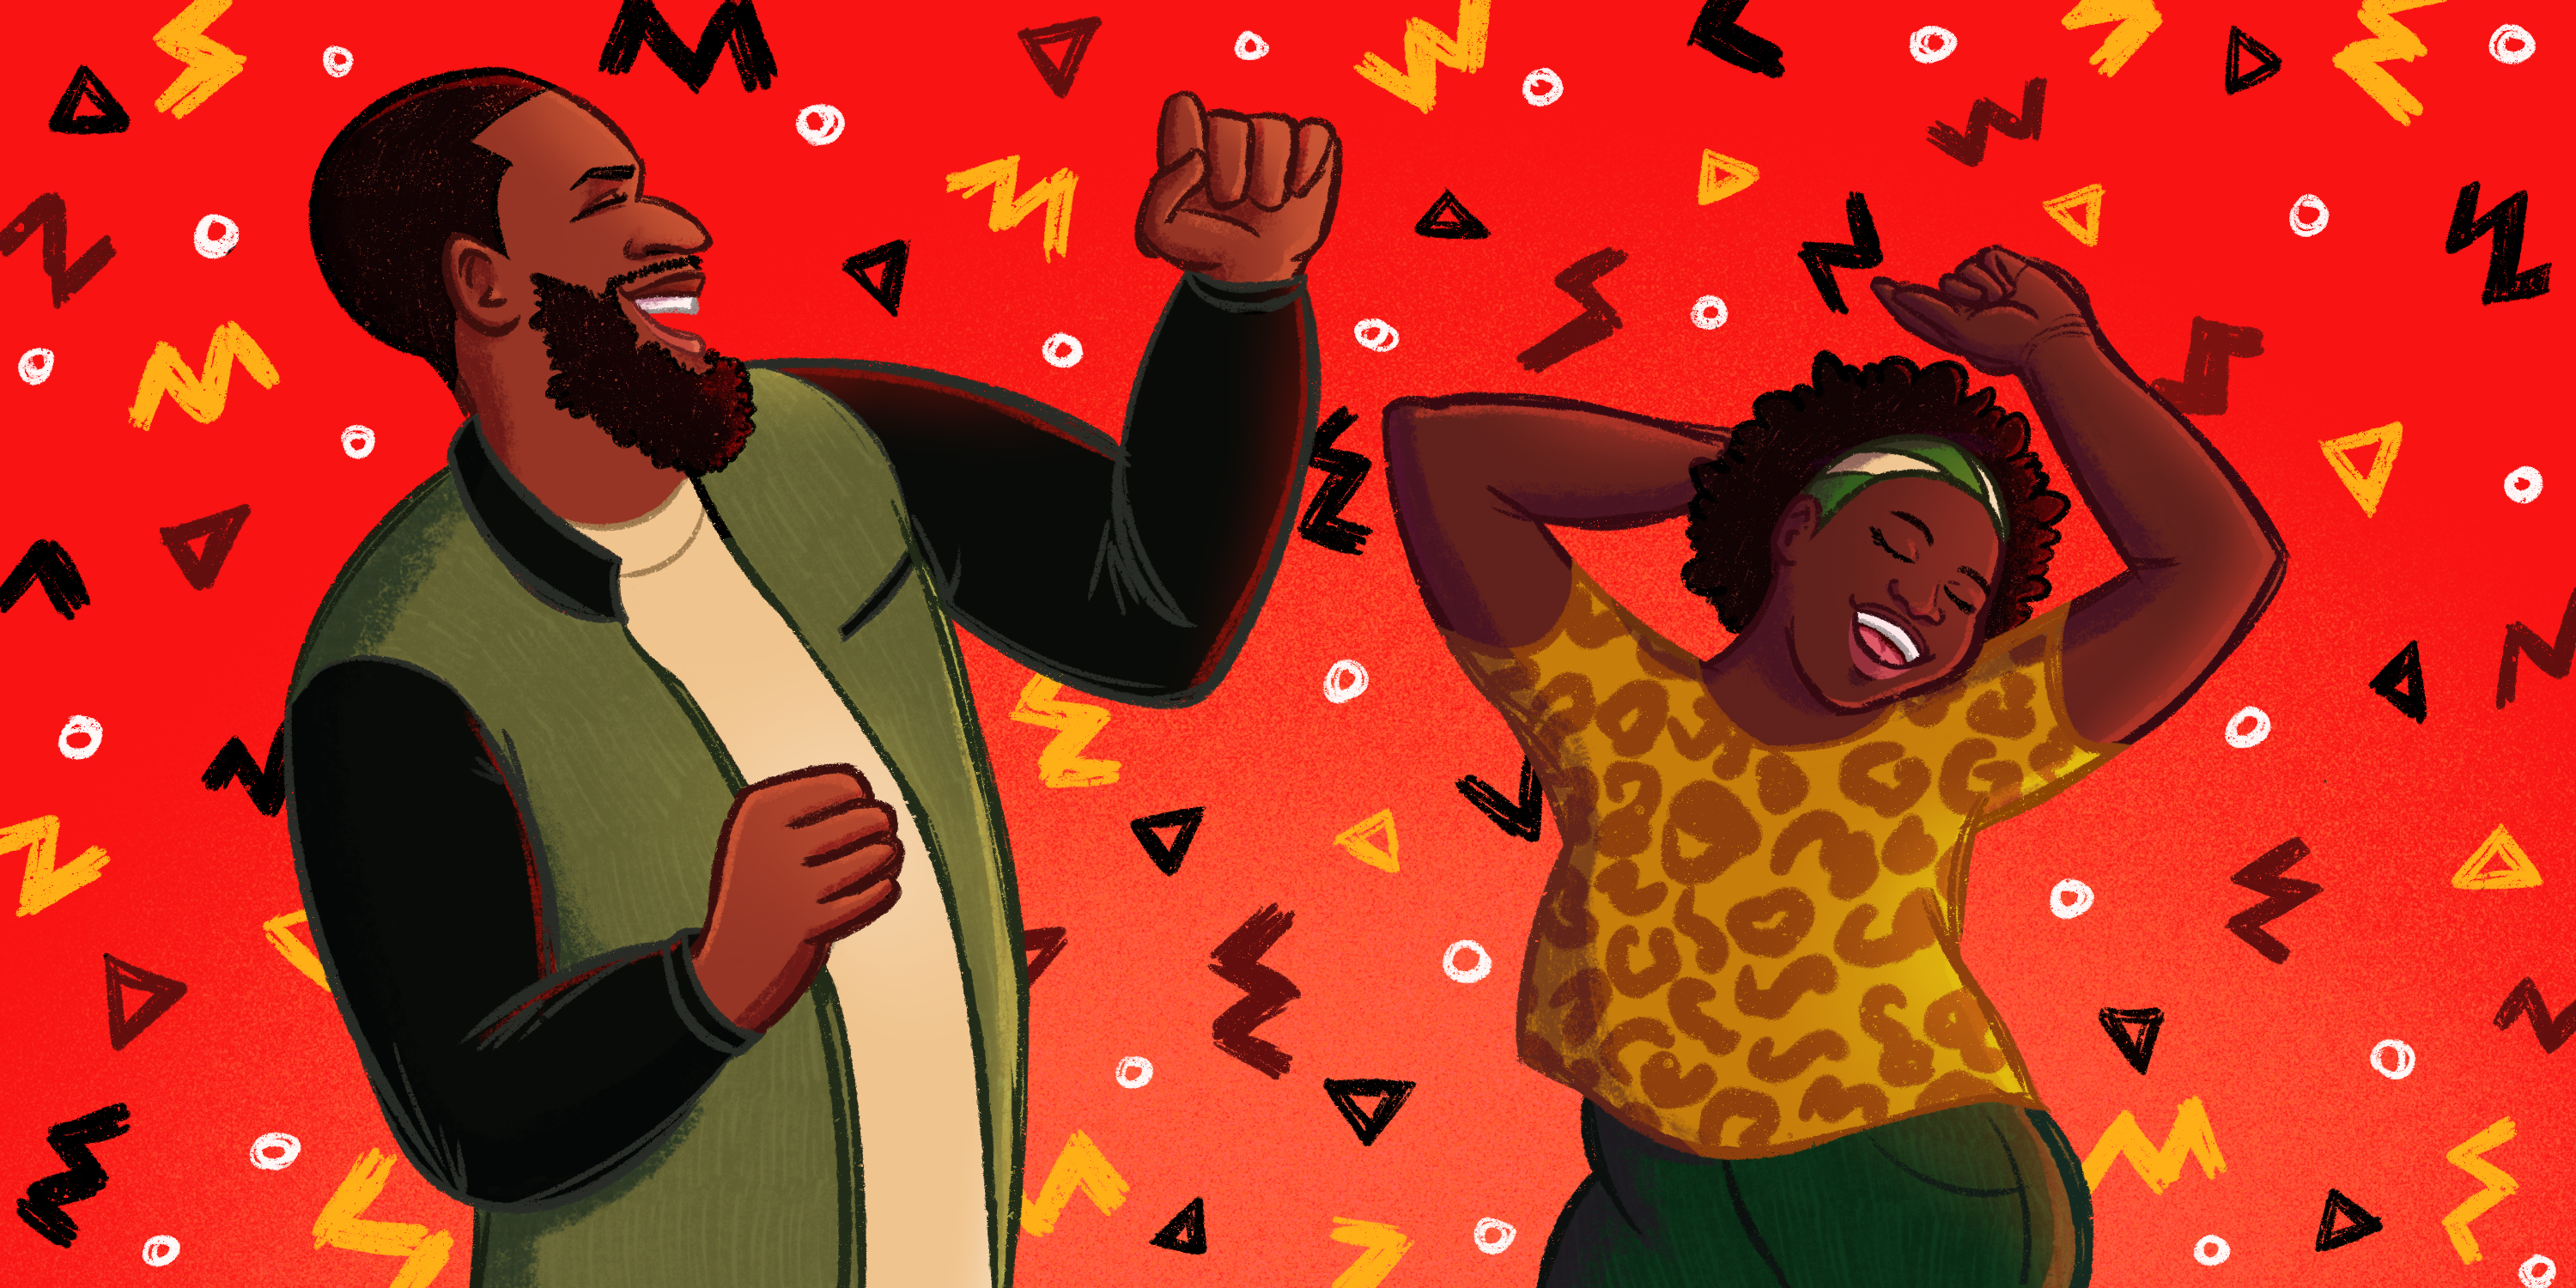 An illustrator of a Black man and a Black woman dancing with their arms in the air. The woman is wearing a cheetah print yellow shirt and black pants. The man is wearing a black and green jacket. The background is red with small squiggly and triangle icons.